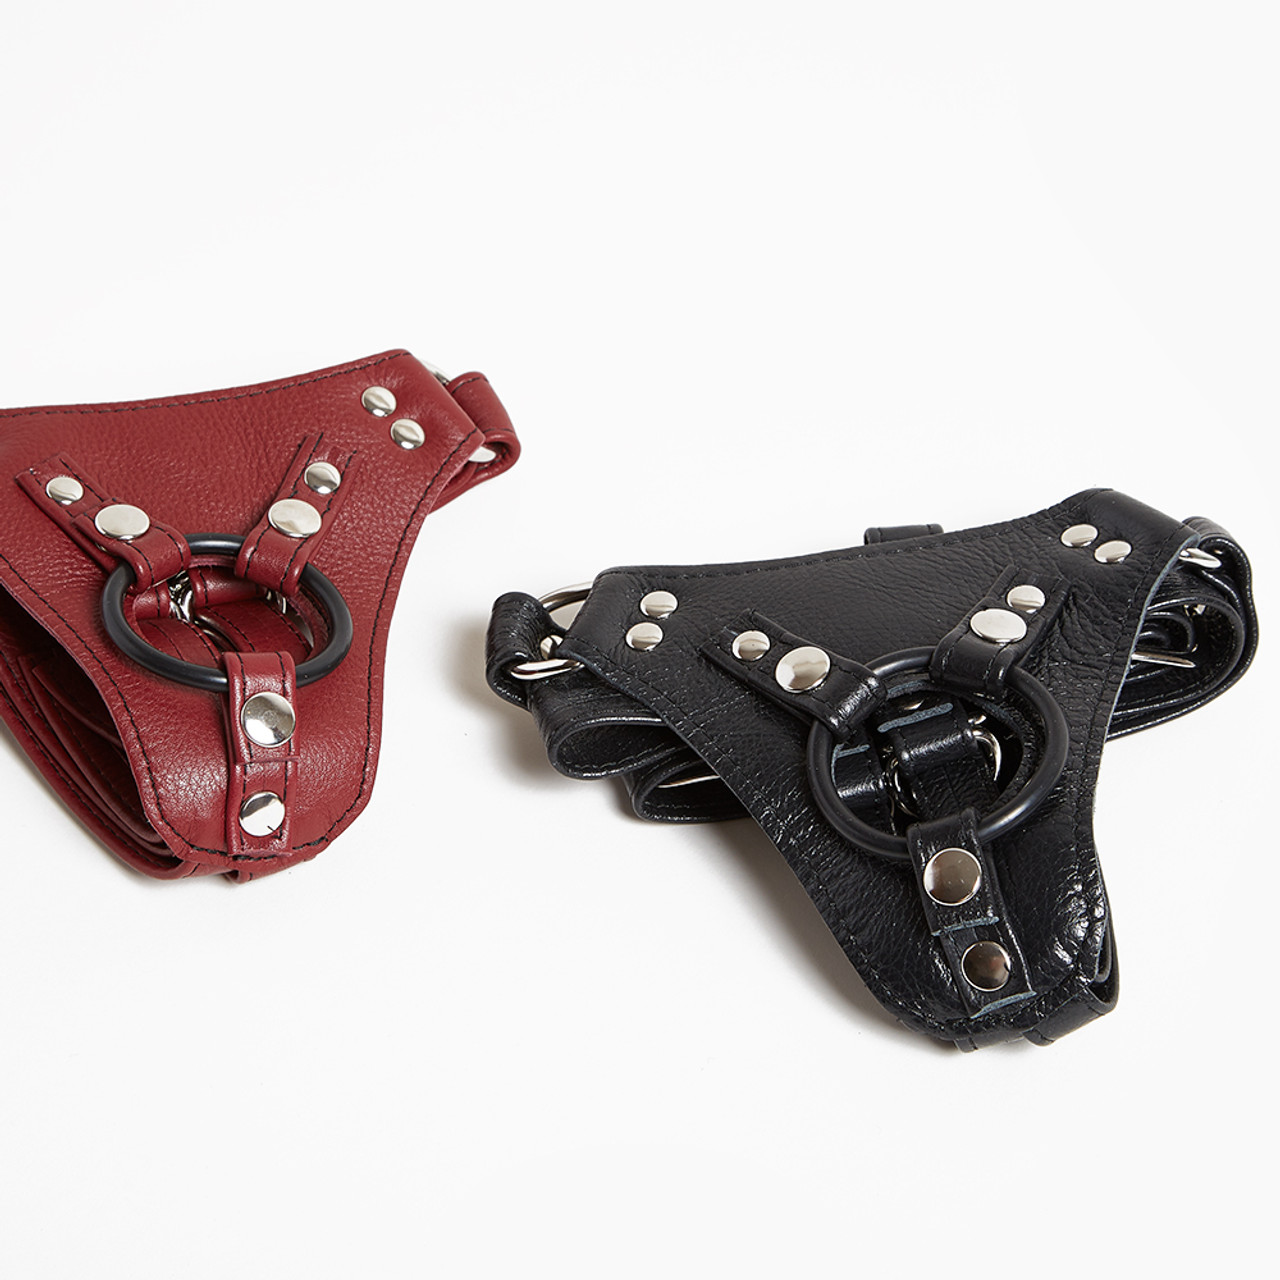 Jaguar Leather Harness in colors cherry red and black